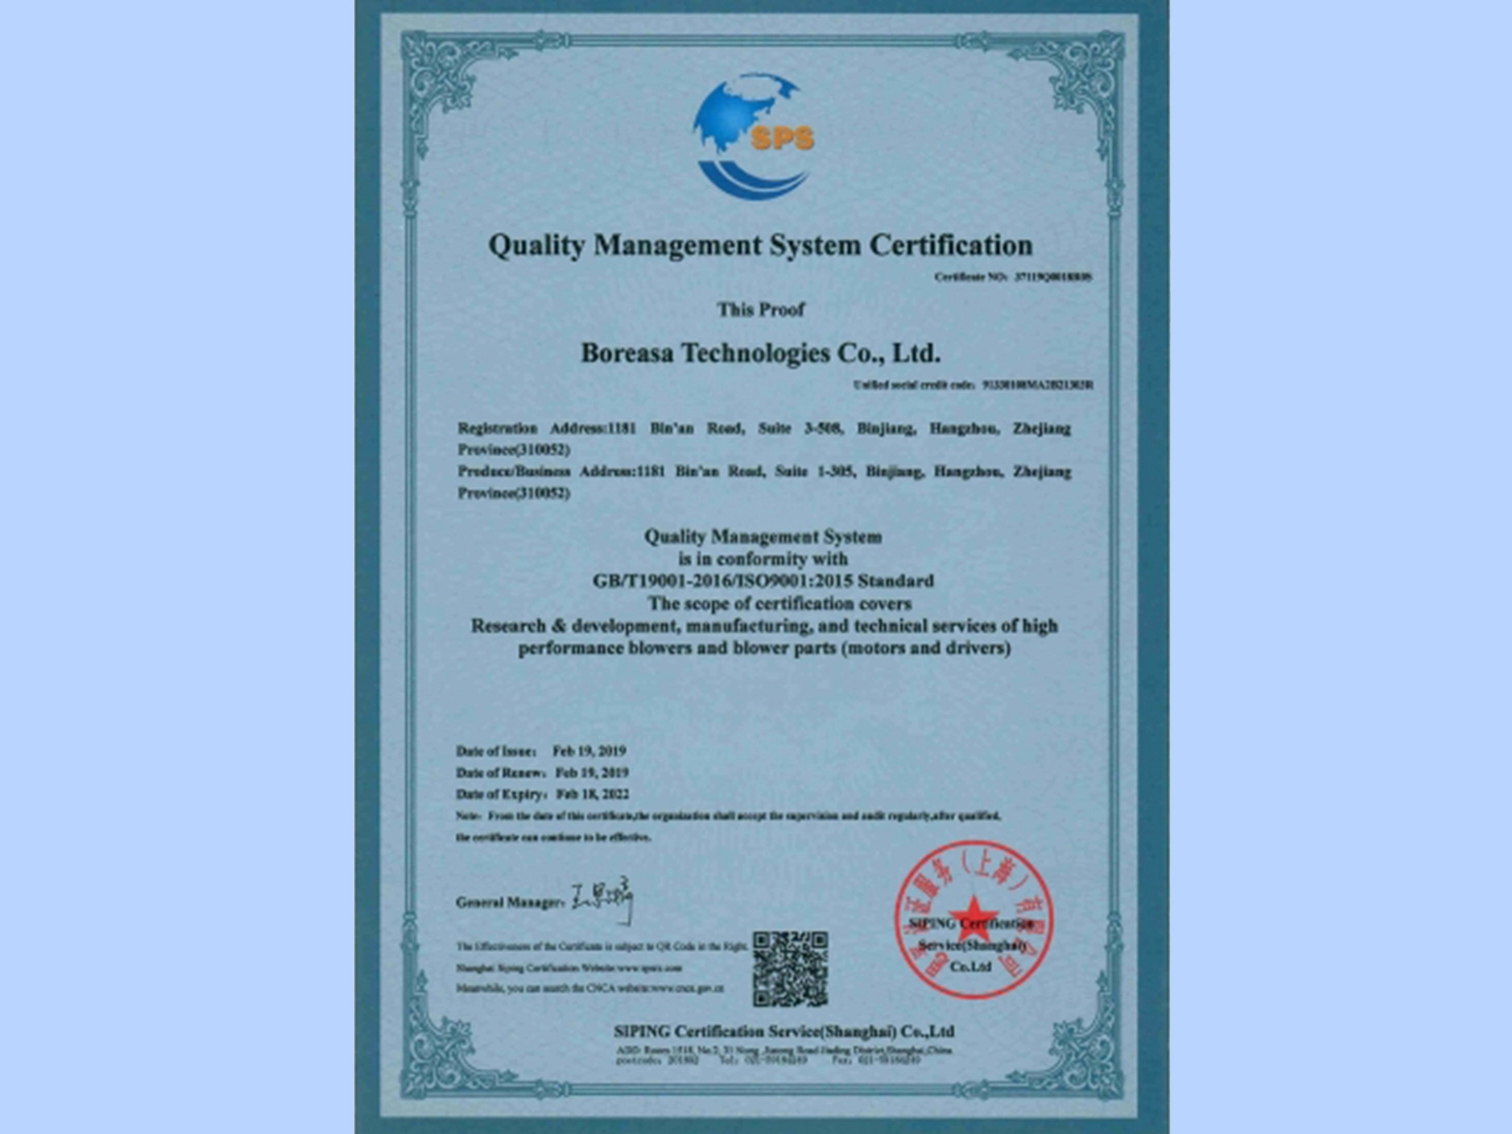 Boreasa Technologies Co., Ltd. was awarded ISO 9001:2015 certification